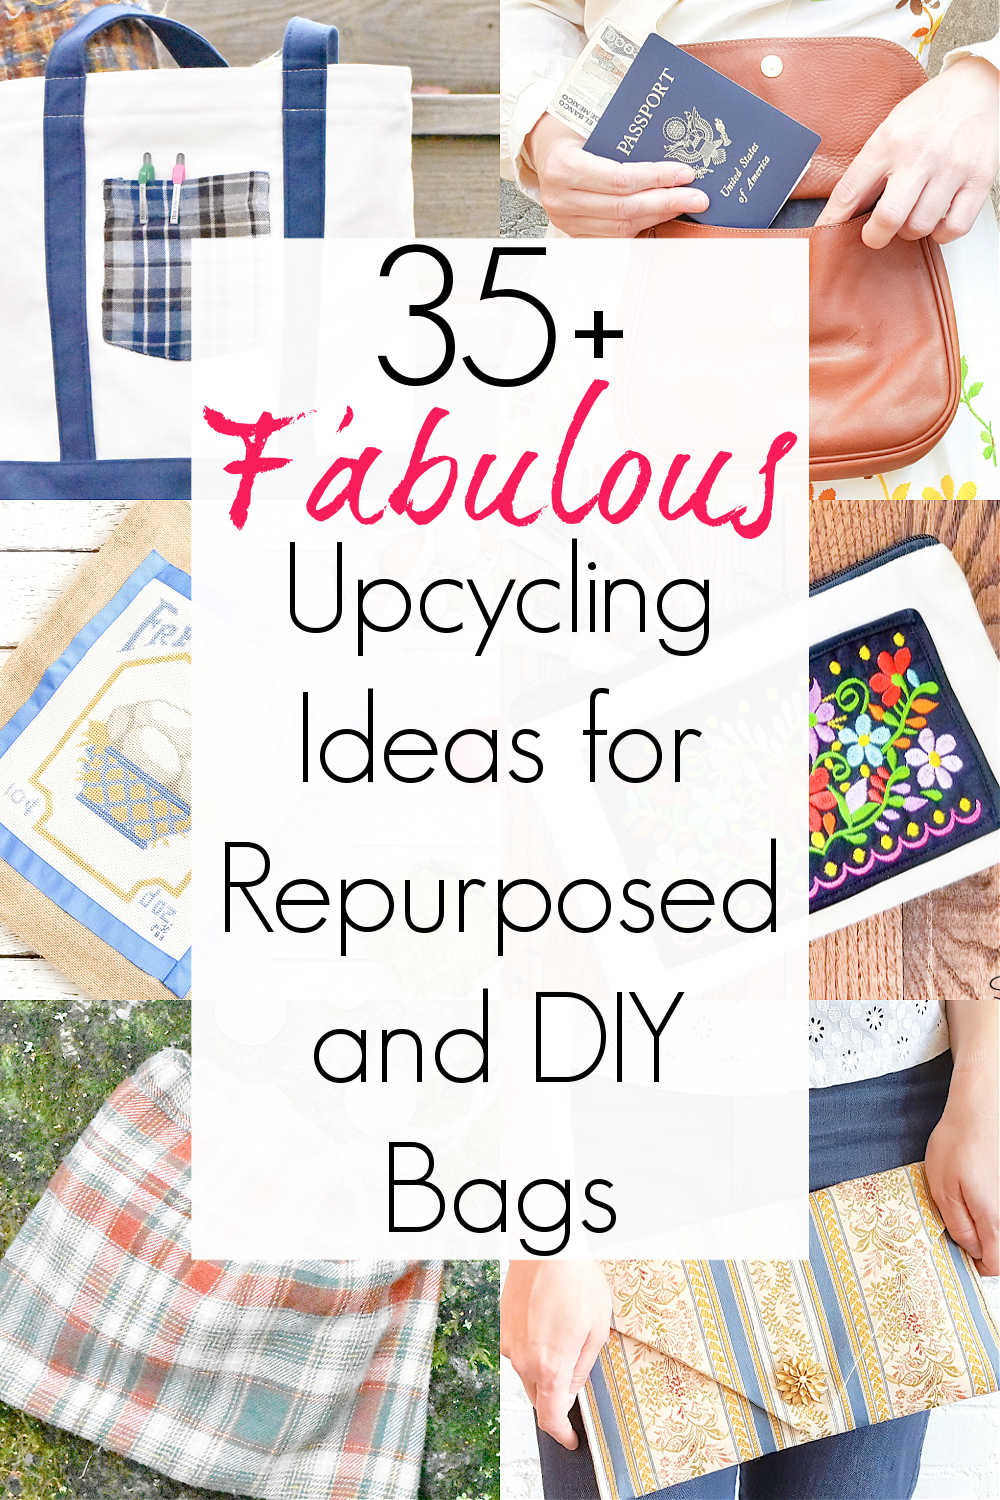 upcycled bags or diy bags